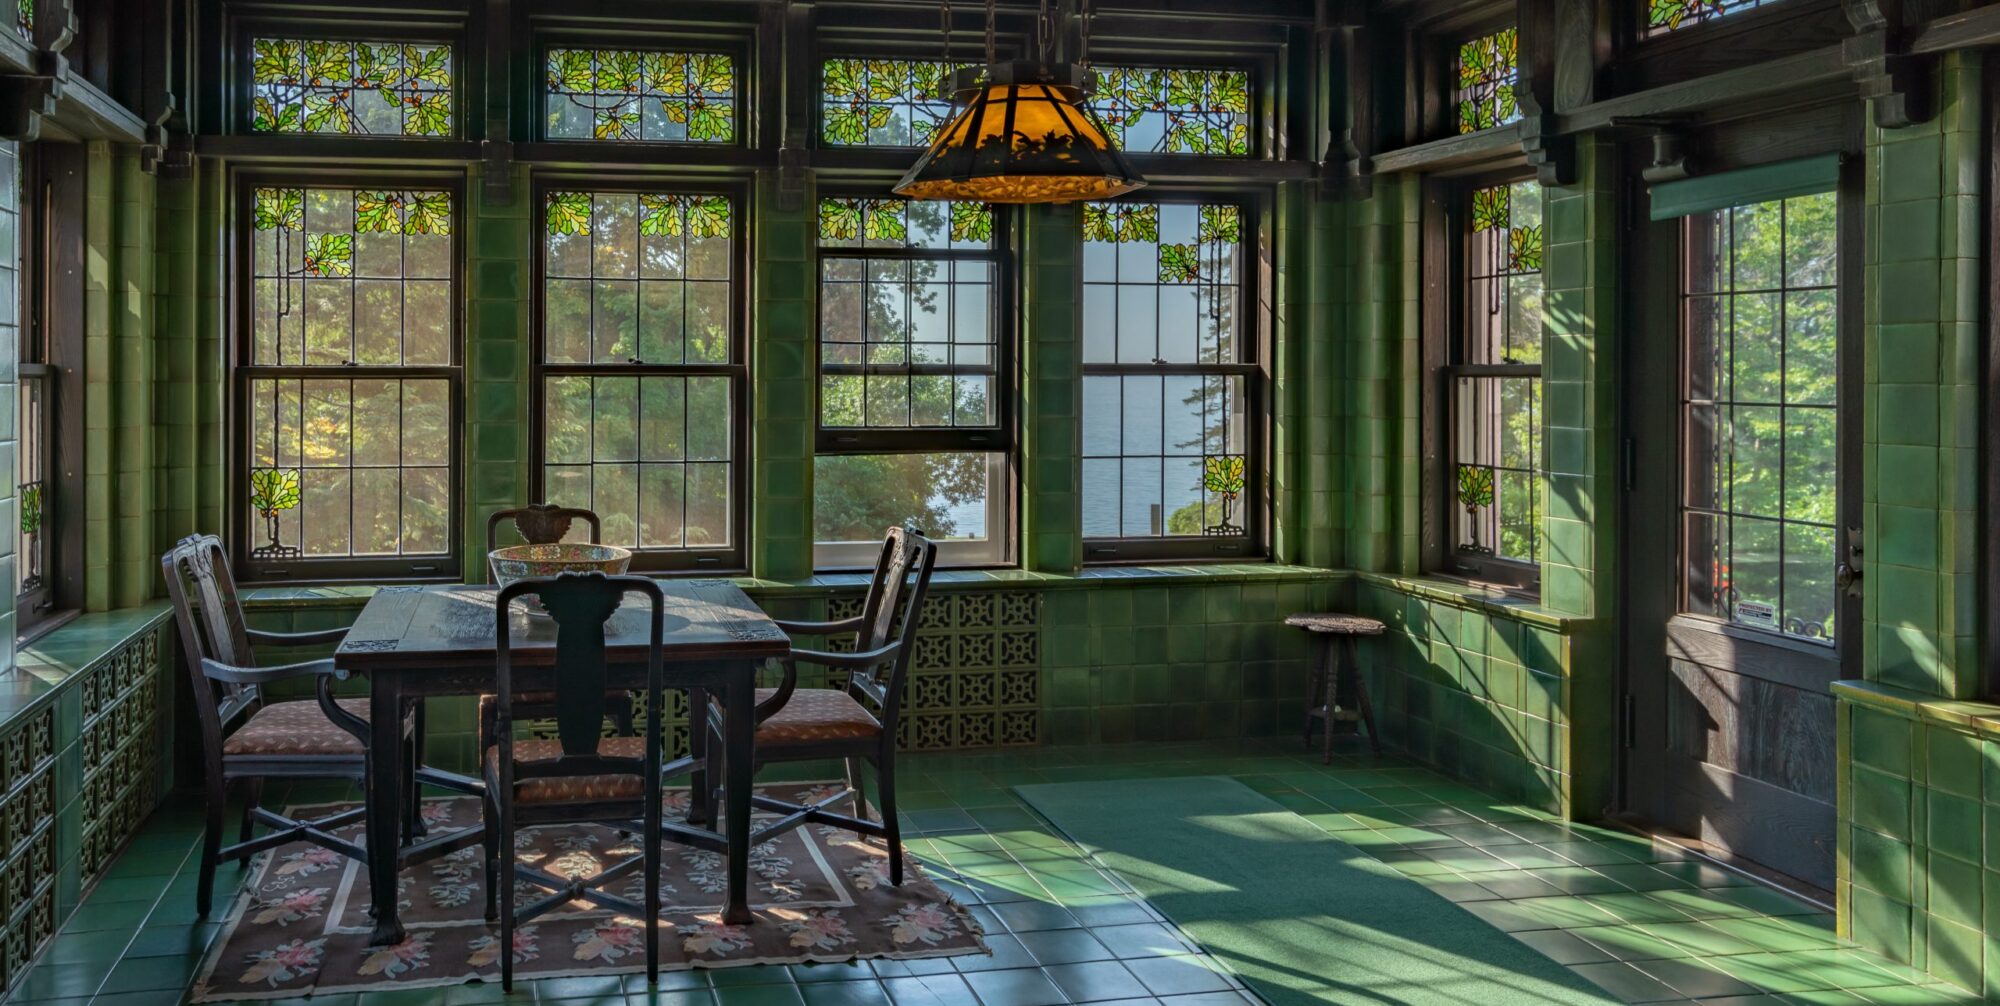 A green tiled room with a table in the corner and chairs around it. There is an orange light fixture hanging from the ceiling and one of the stained glass windows is ajar.